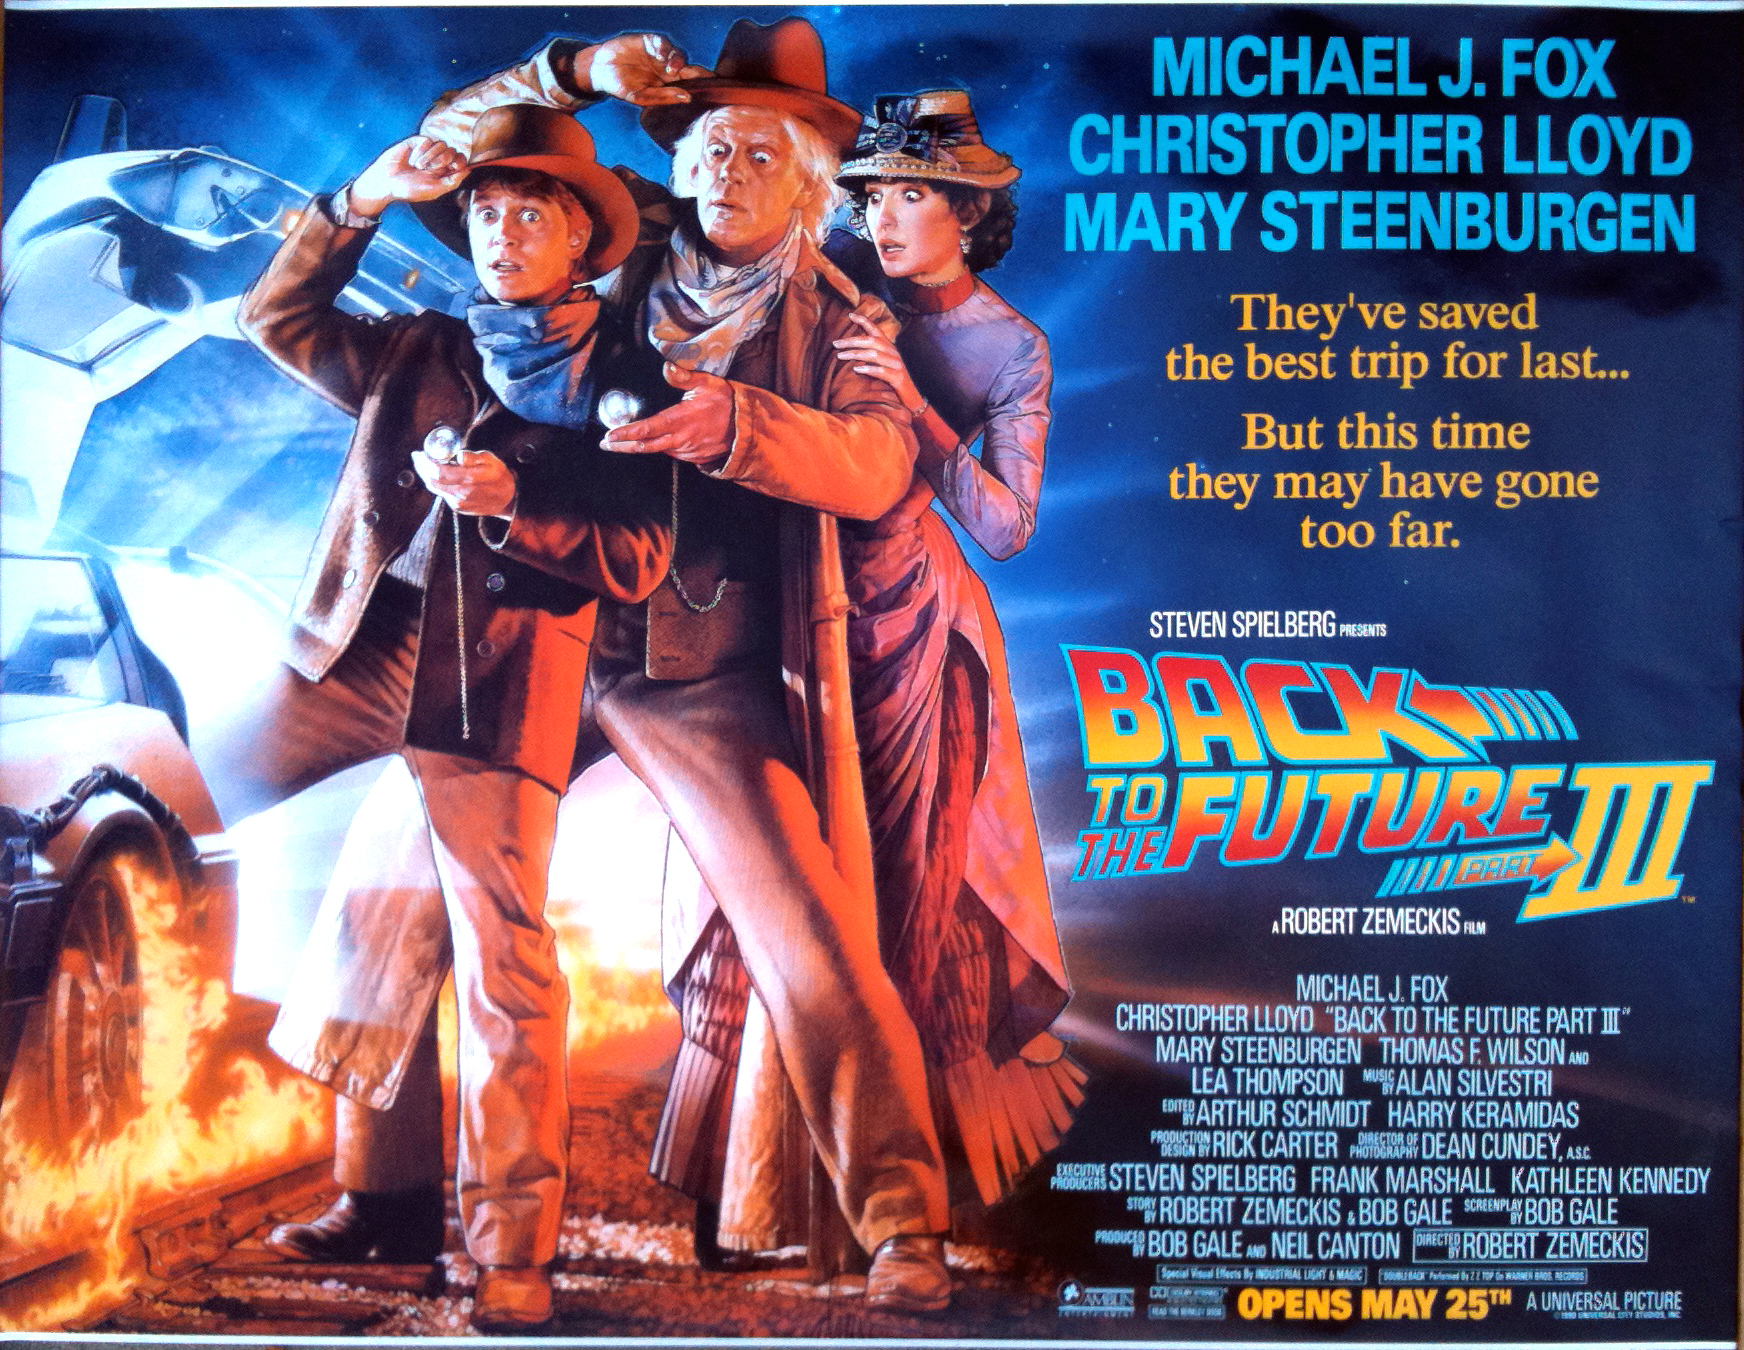 Back To The Future Part III Backgrounds, Compatible - PC, Mobile, Gadgets| 1744x1350 px